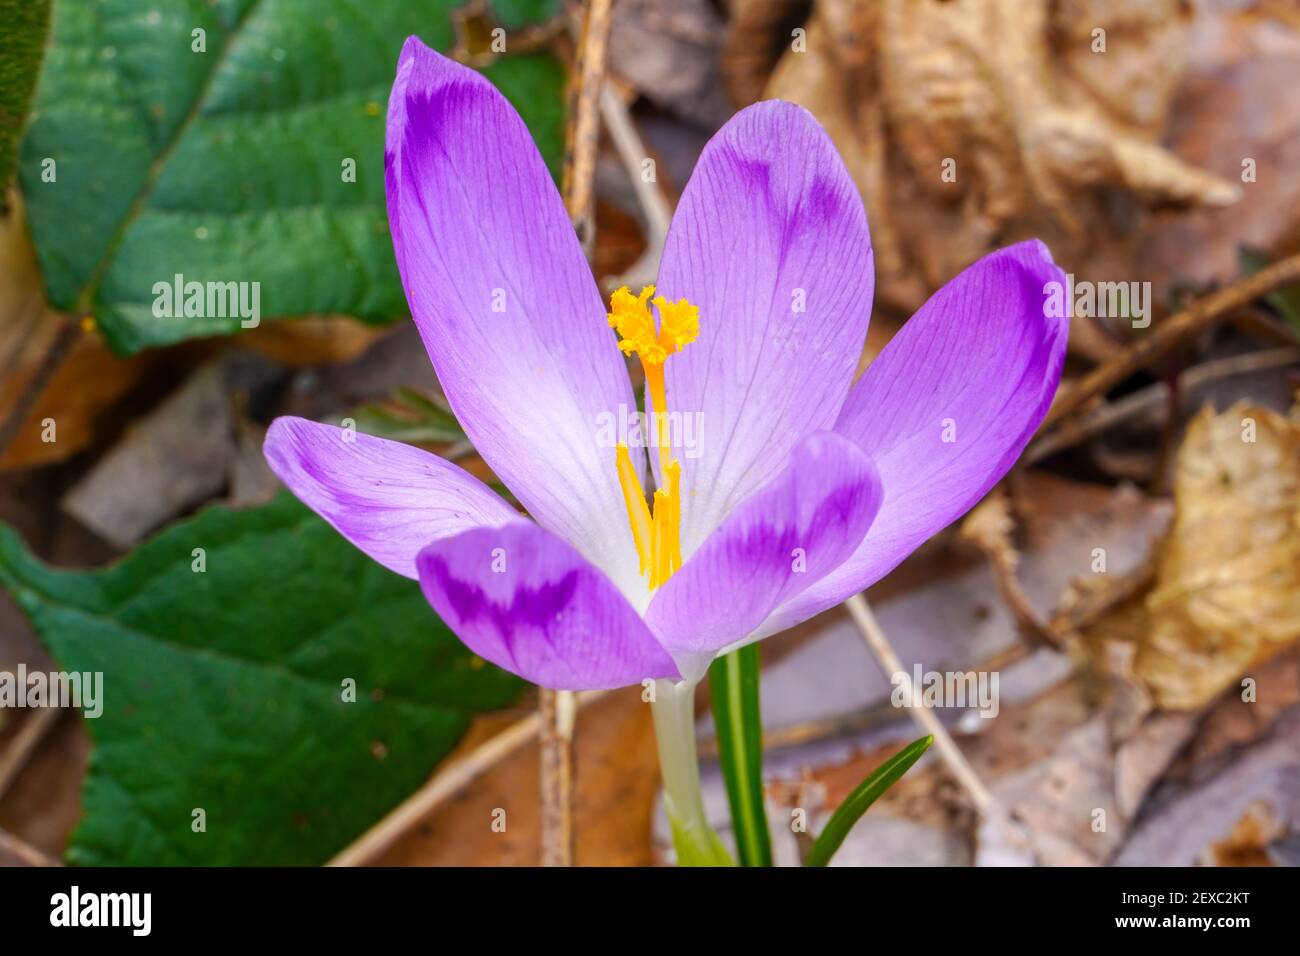 Blooming purple saffron flower. Early spring violet crocuses in the forest. Autumn leafs background. Stock Photo